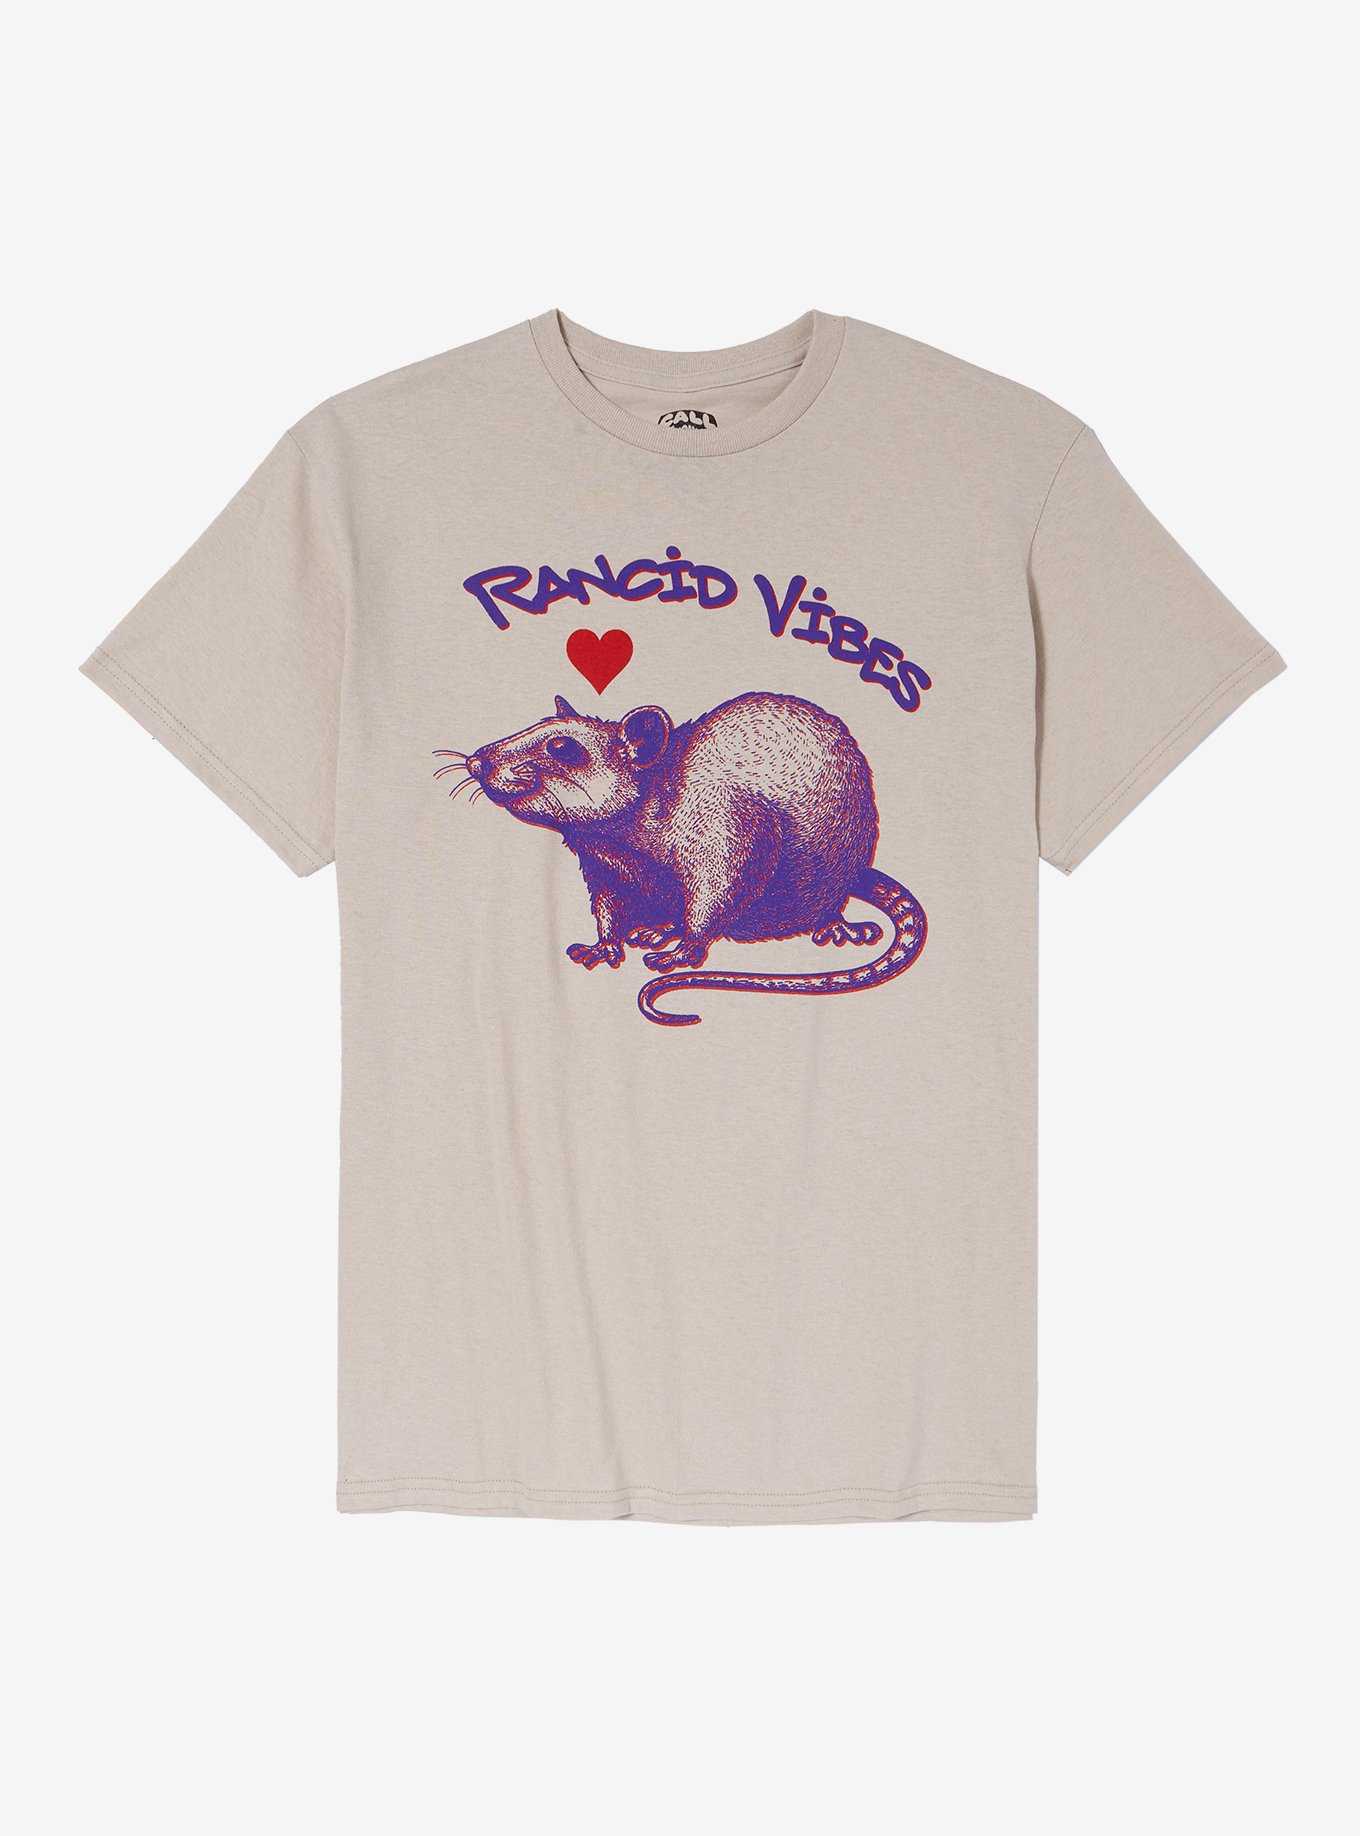 Rancid Vibes Rat T-Shirt By Call Your Mother, , hi-res